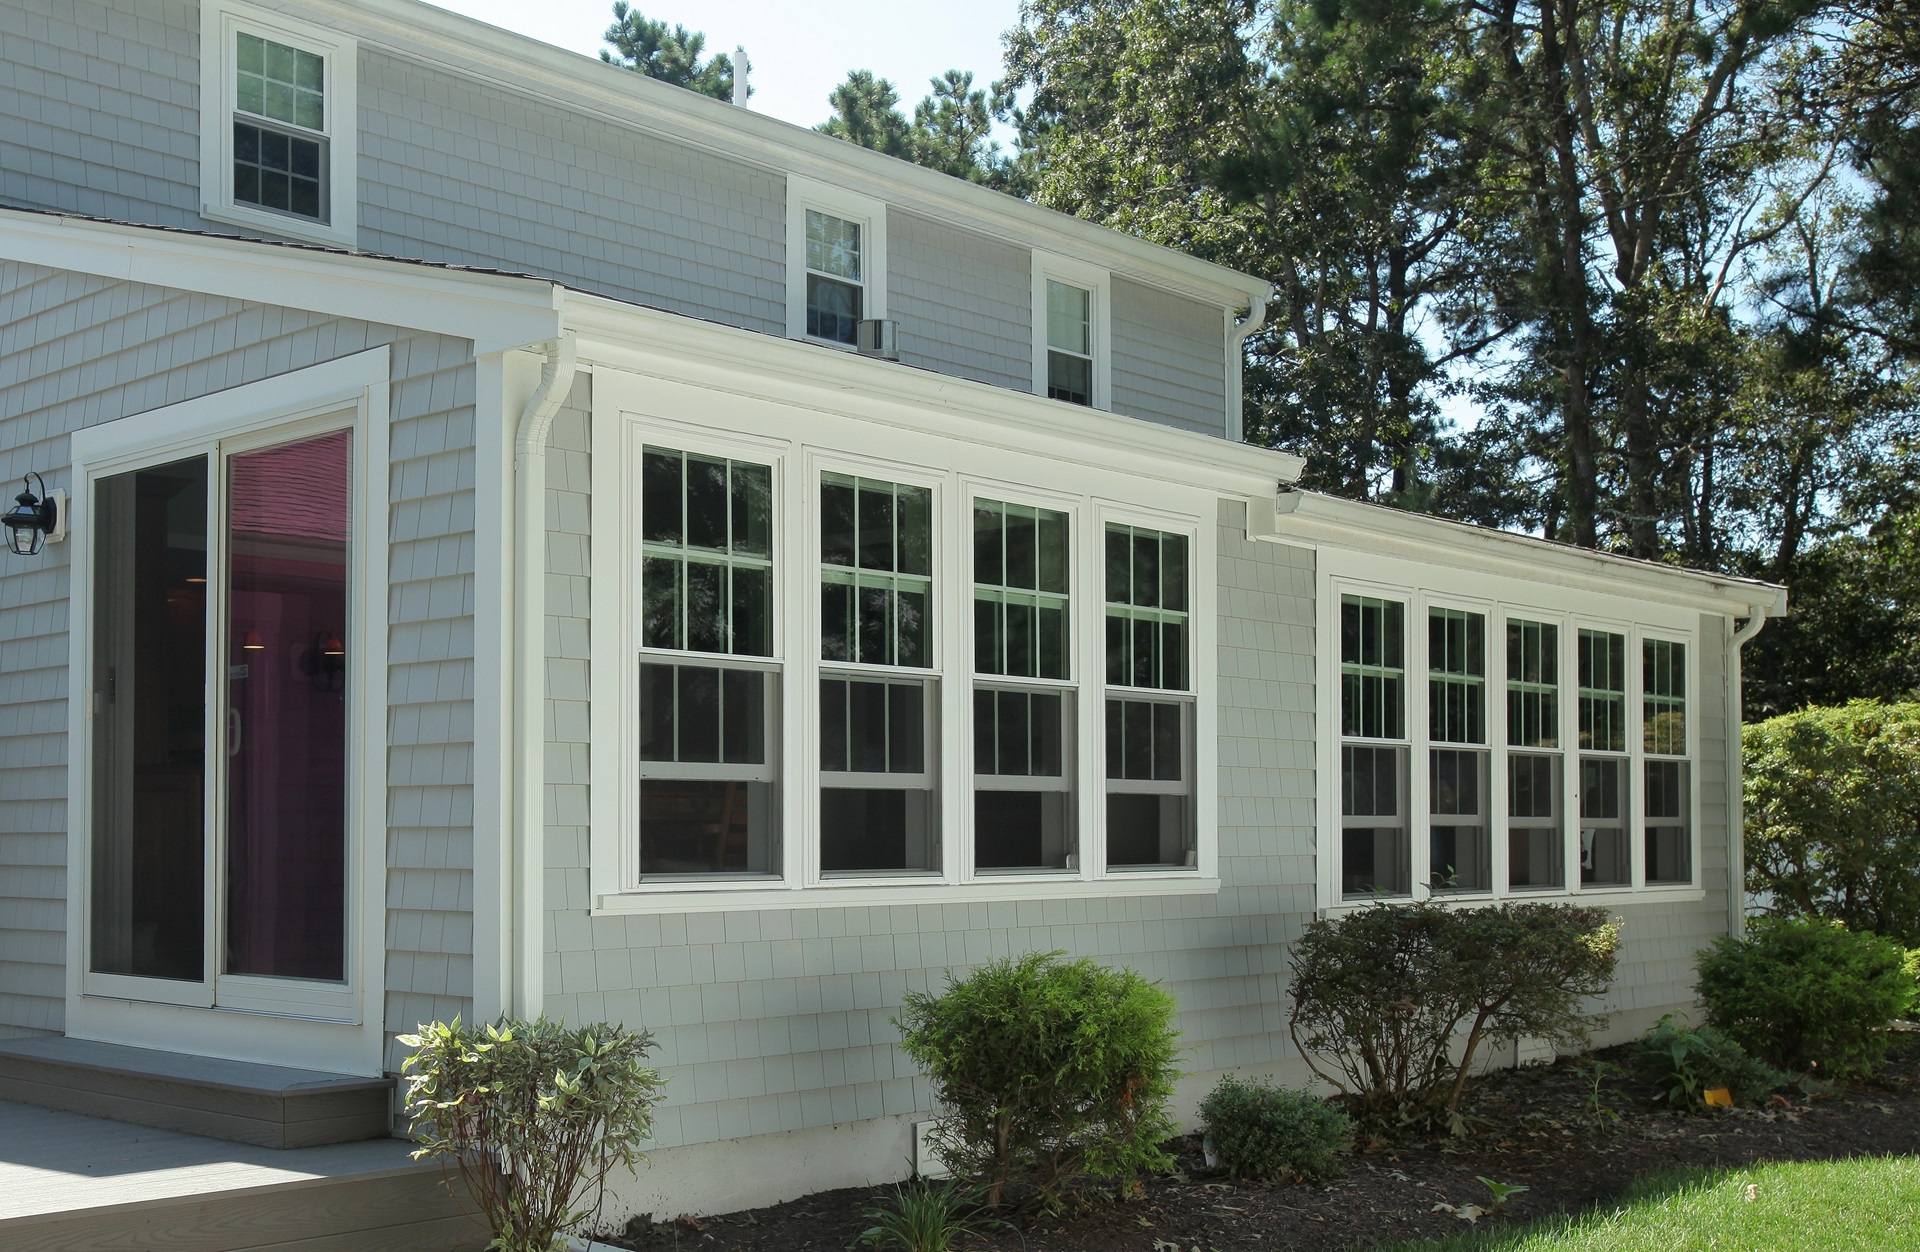 We Are On Your Side – Siding Solutions For Your Home